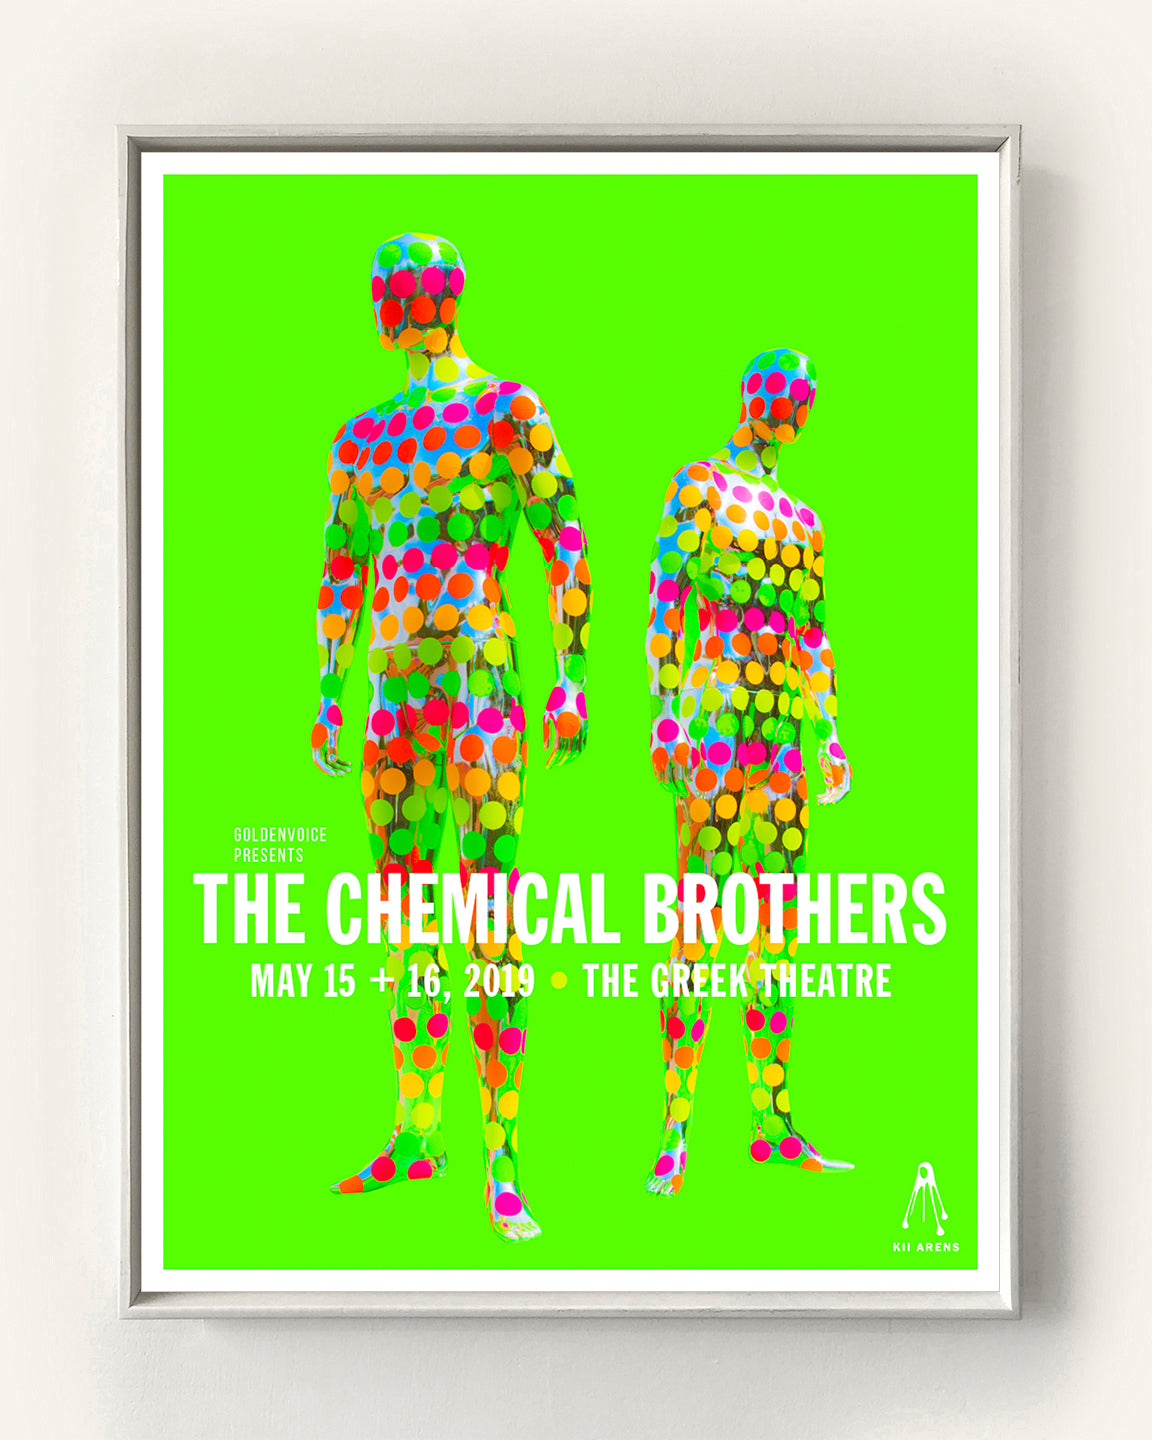 THE CHEMICAL BROTHERS - GREEK THEATRE – Kii Arens Art